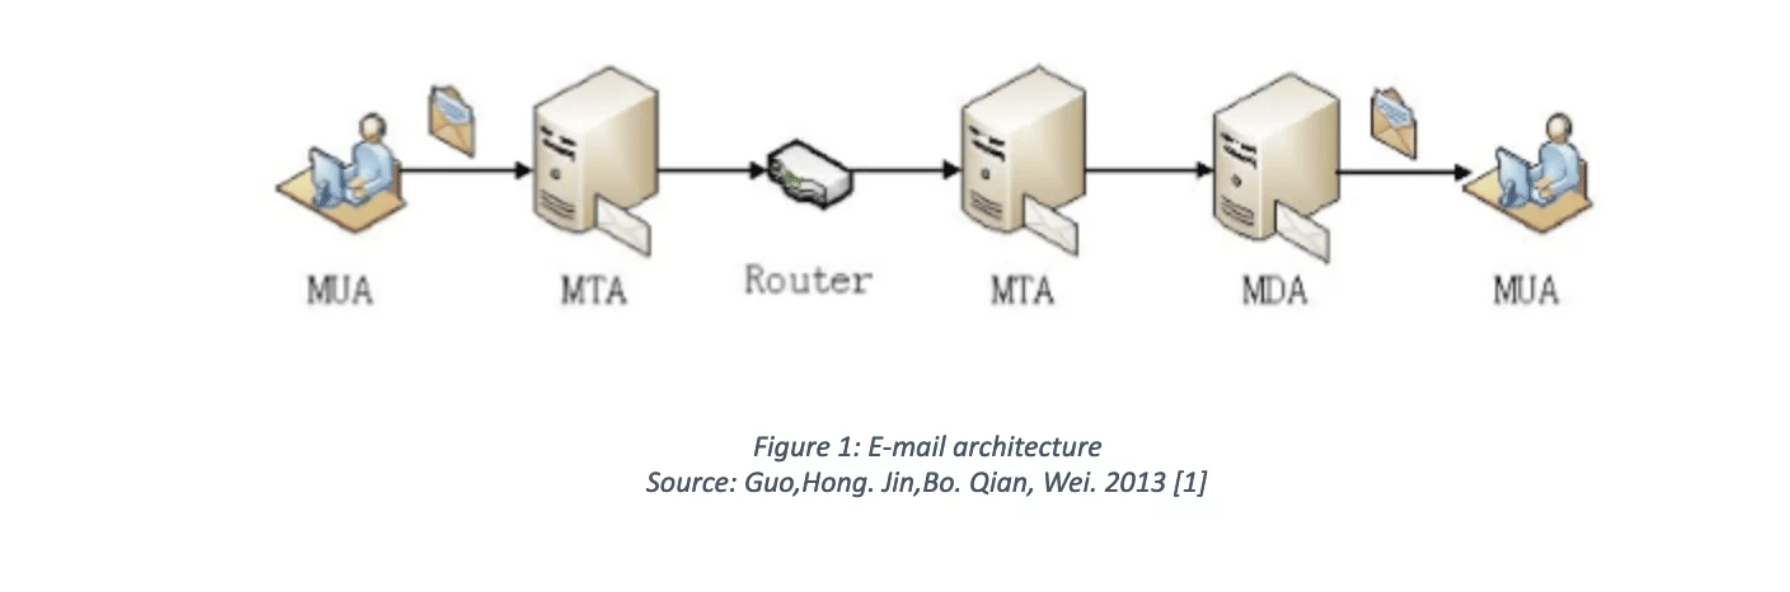 Email Architecture